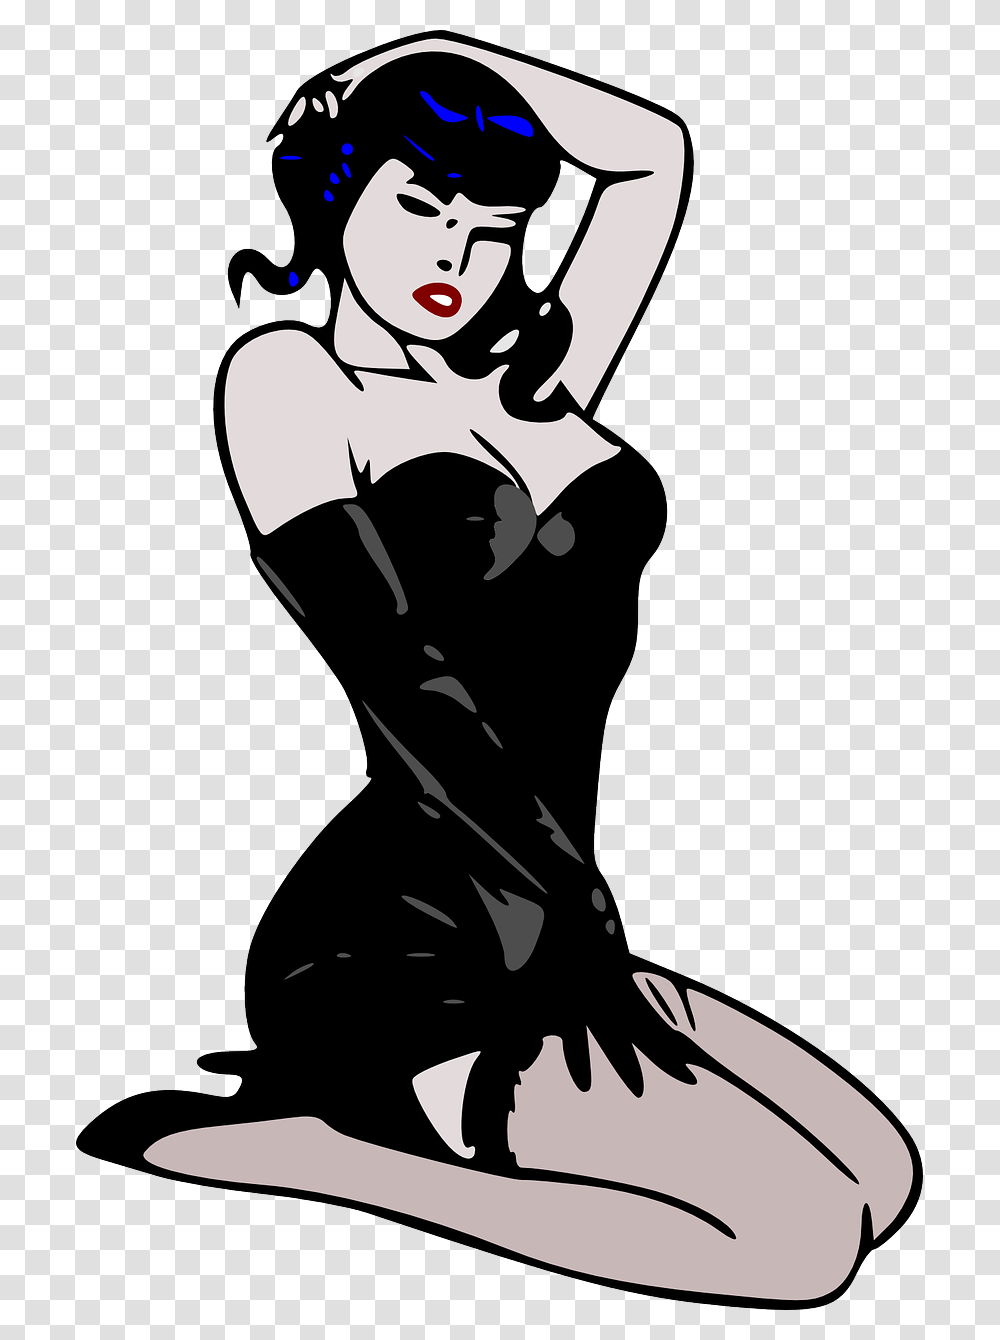 Halloween Feeling Sexy In Black Lingerie With This Irony Of A Blowjob, Performer, Leisure Activities, Kneeling, Stencil Transparent Png